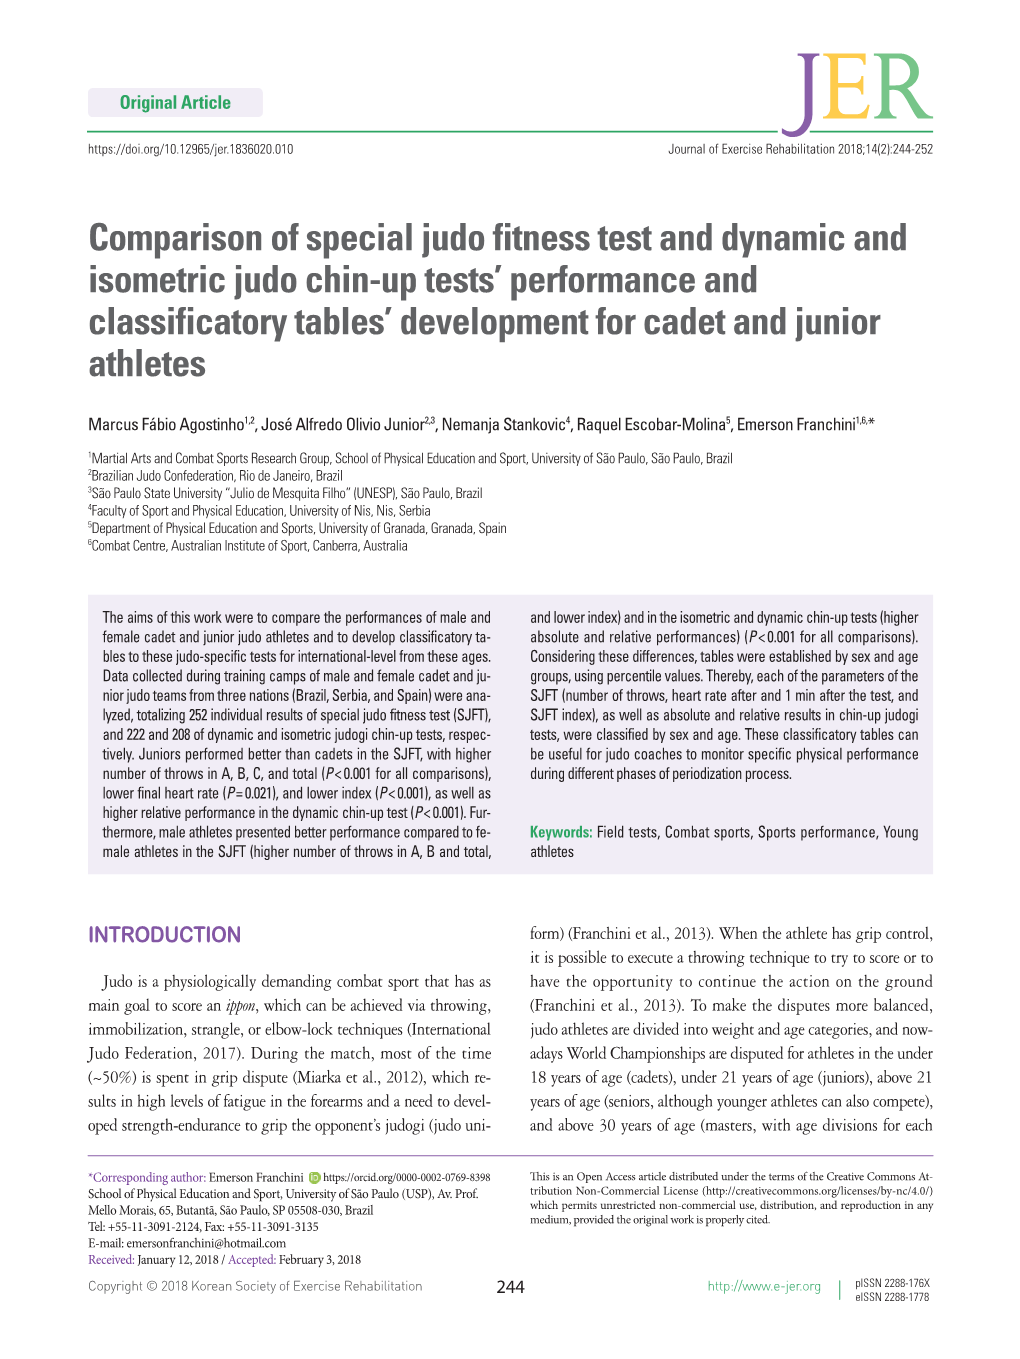 Comparison of Special Judo Fitness Test and Dynamic and Isometric Judo Chin-Up Tests' Performance and Classificatory Tables'